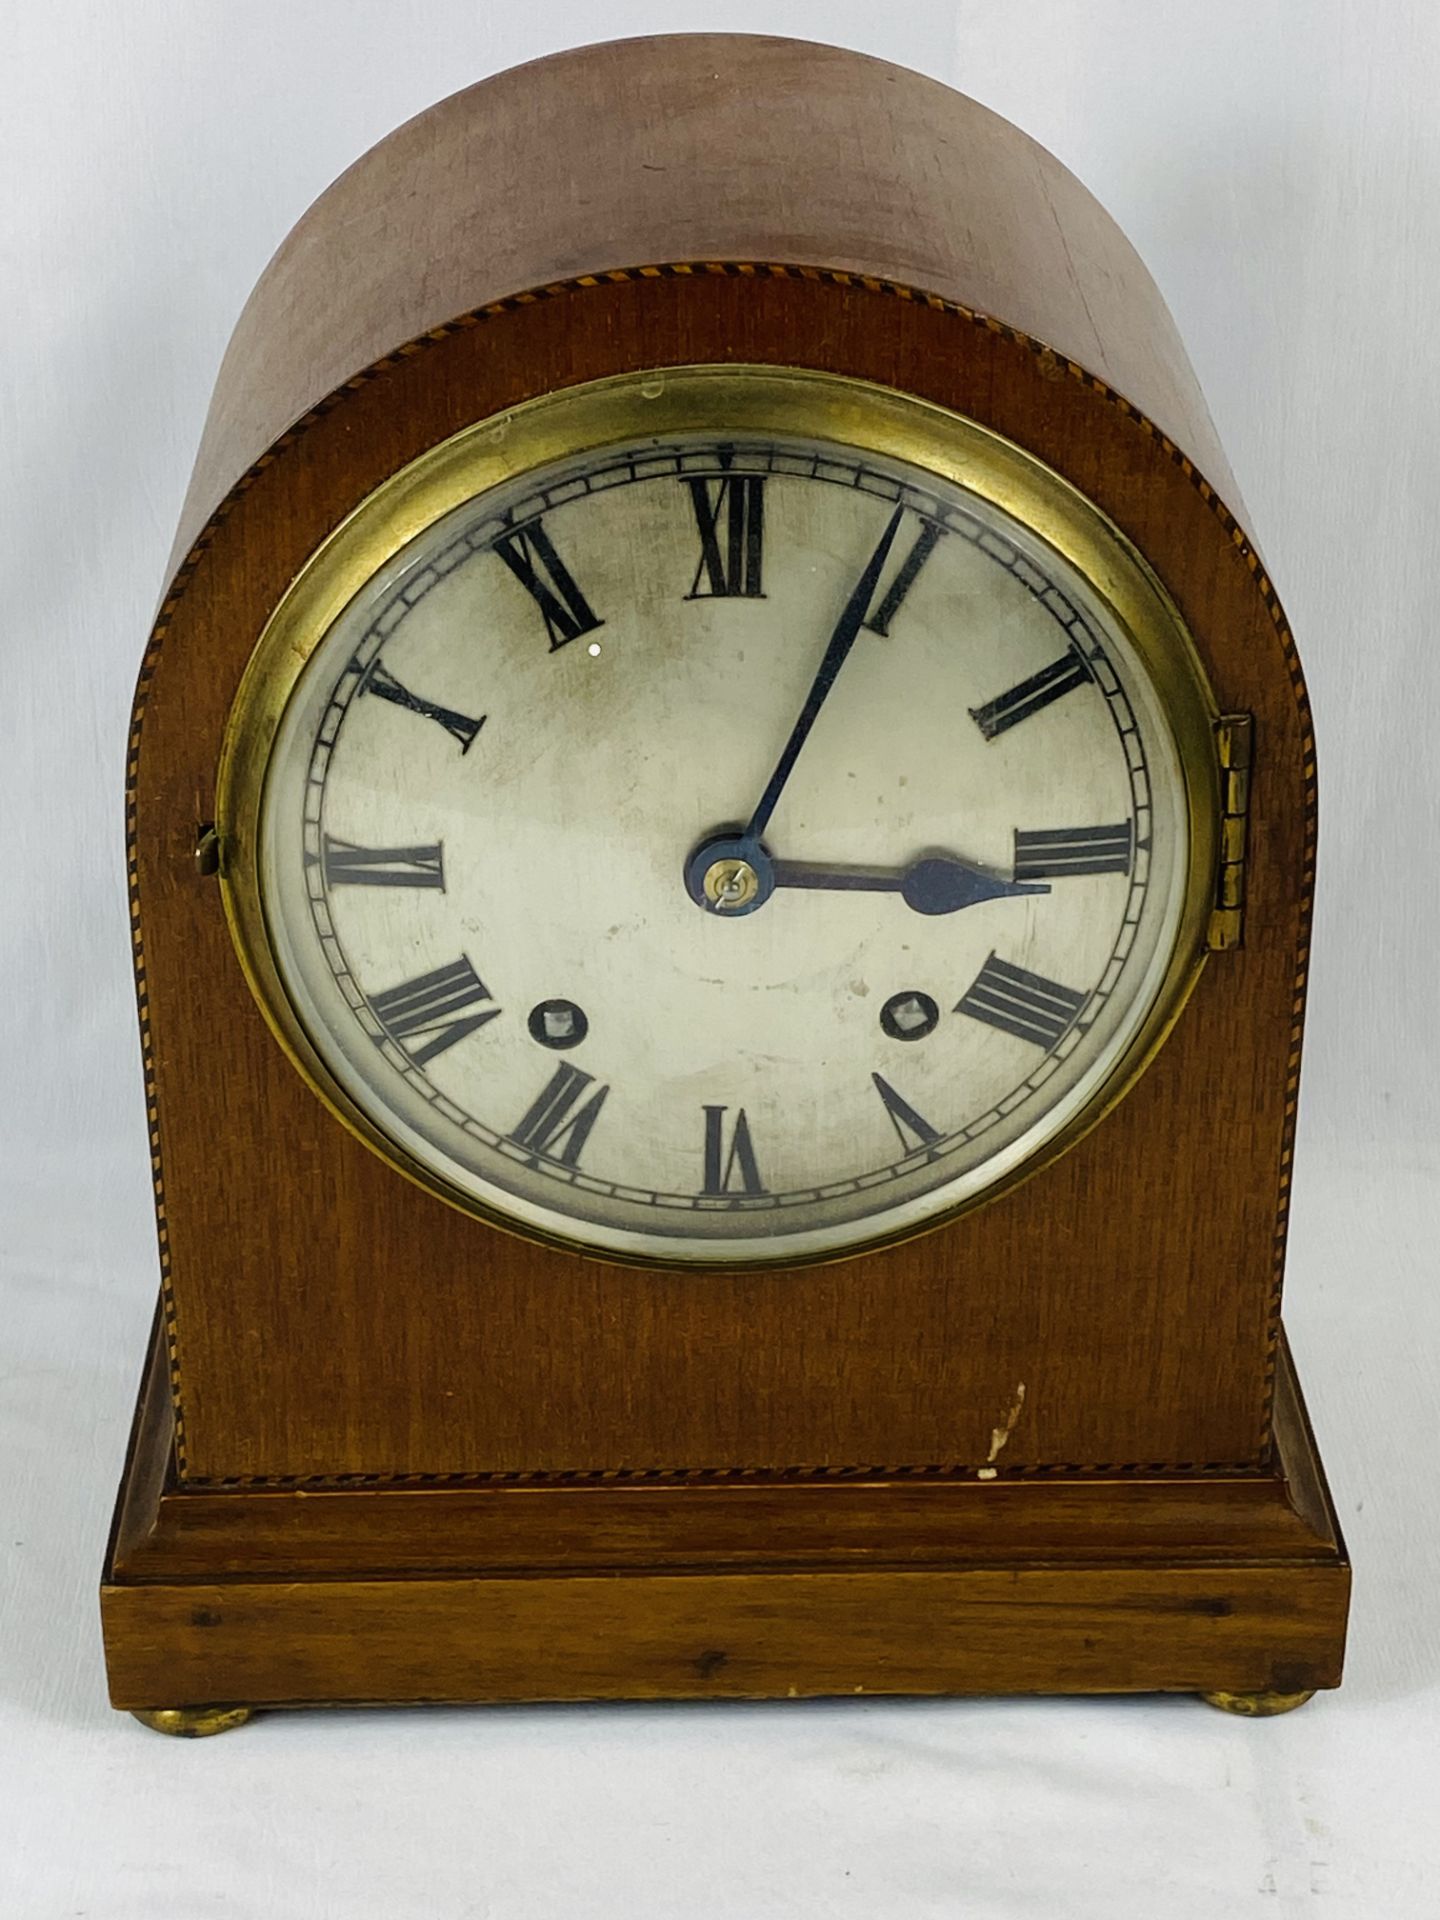 Slate cased mantel clock together with a mahogany mantel clock - Image 4 of 4